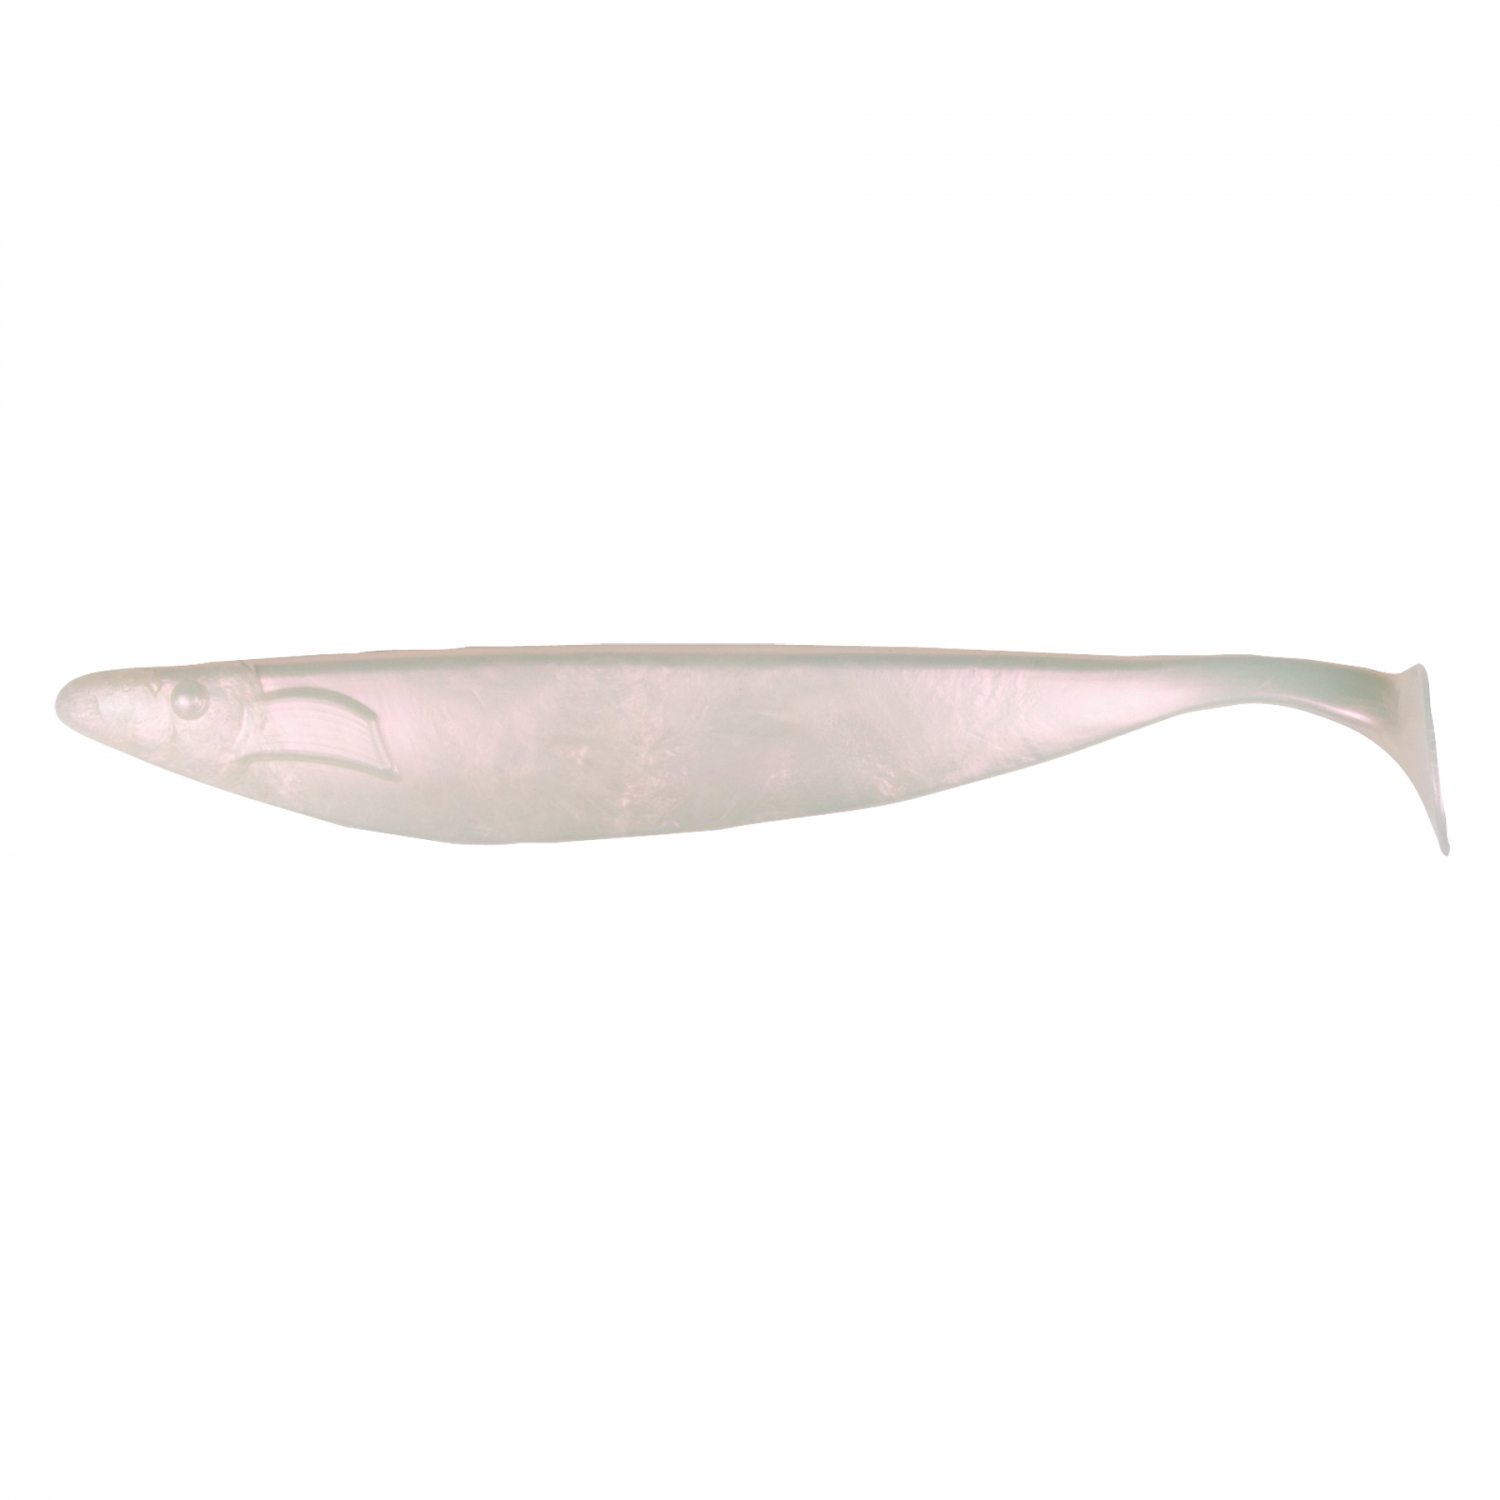 Jackson Shad XXL Active (mother of pearl) 